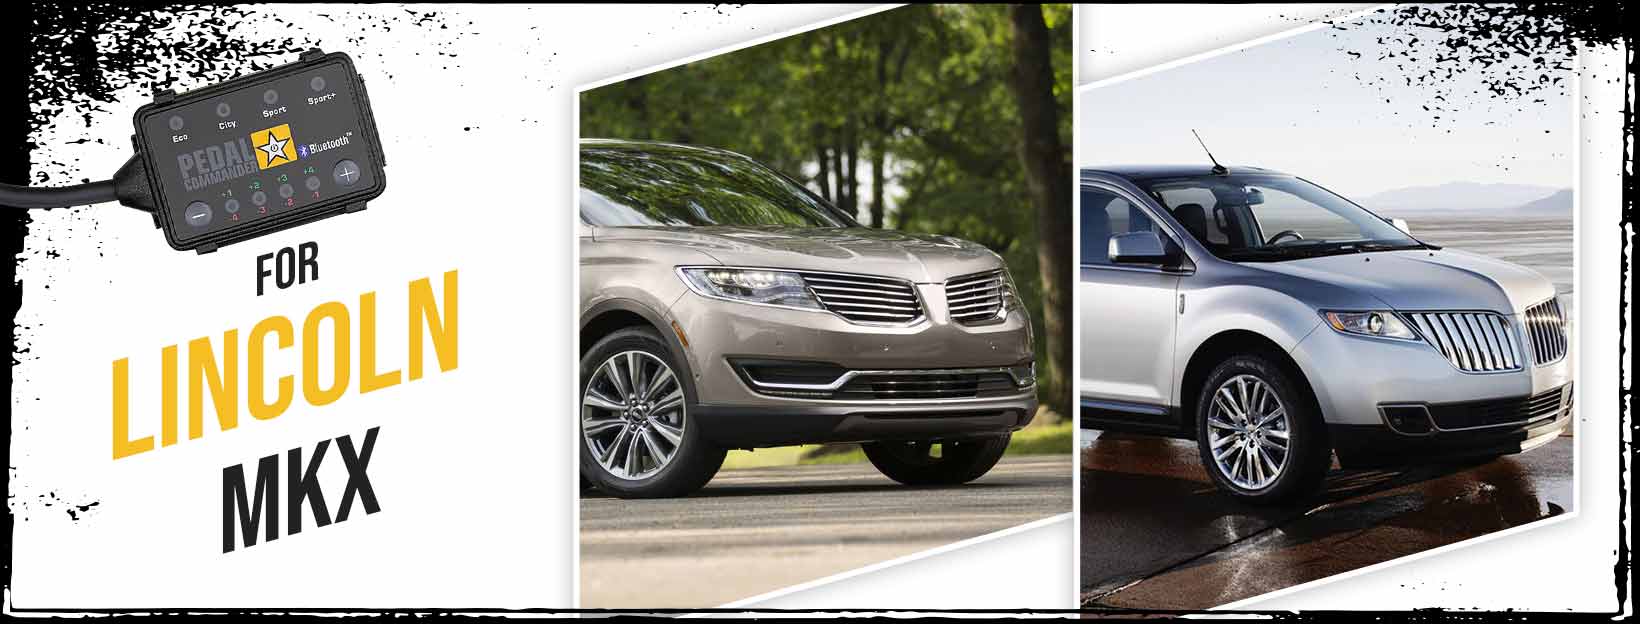 Pedal Commander for Lincoln MKX